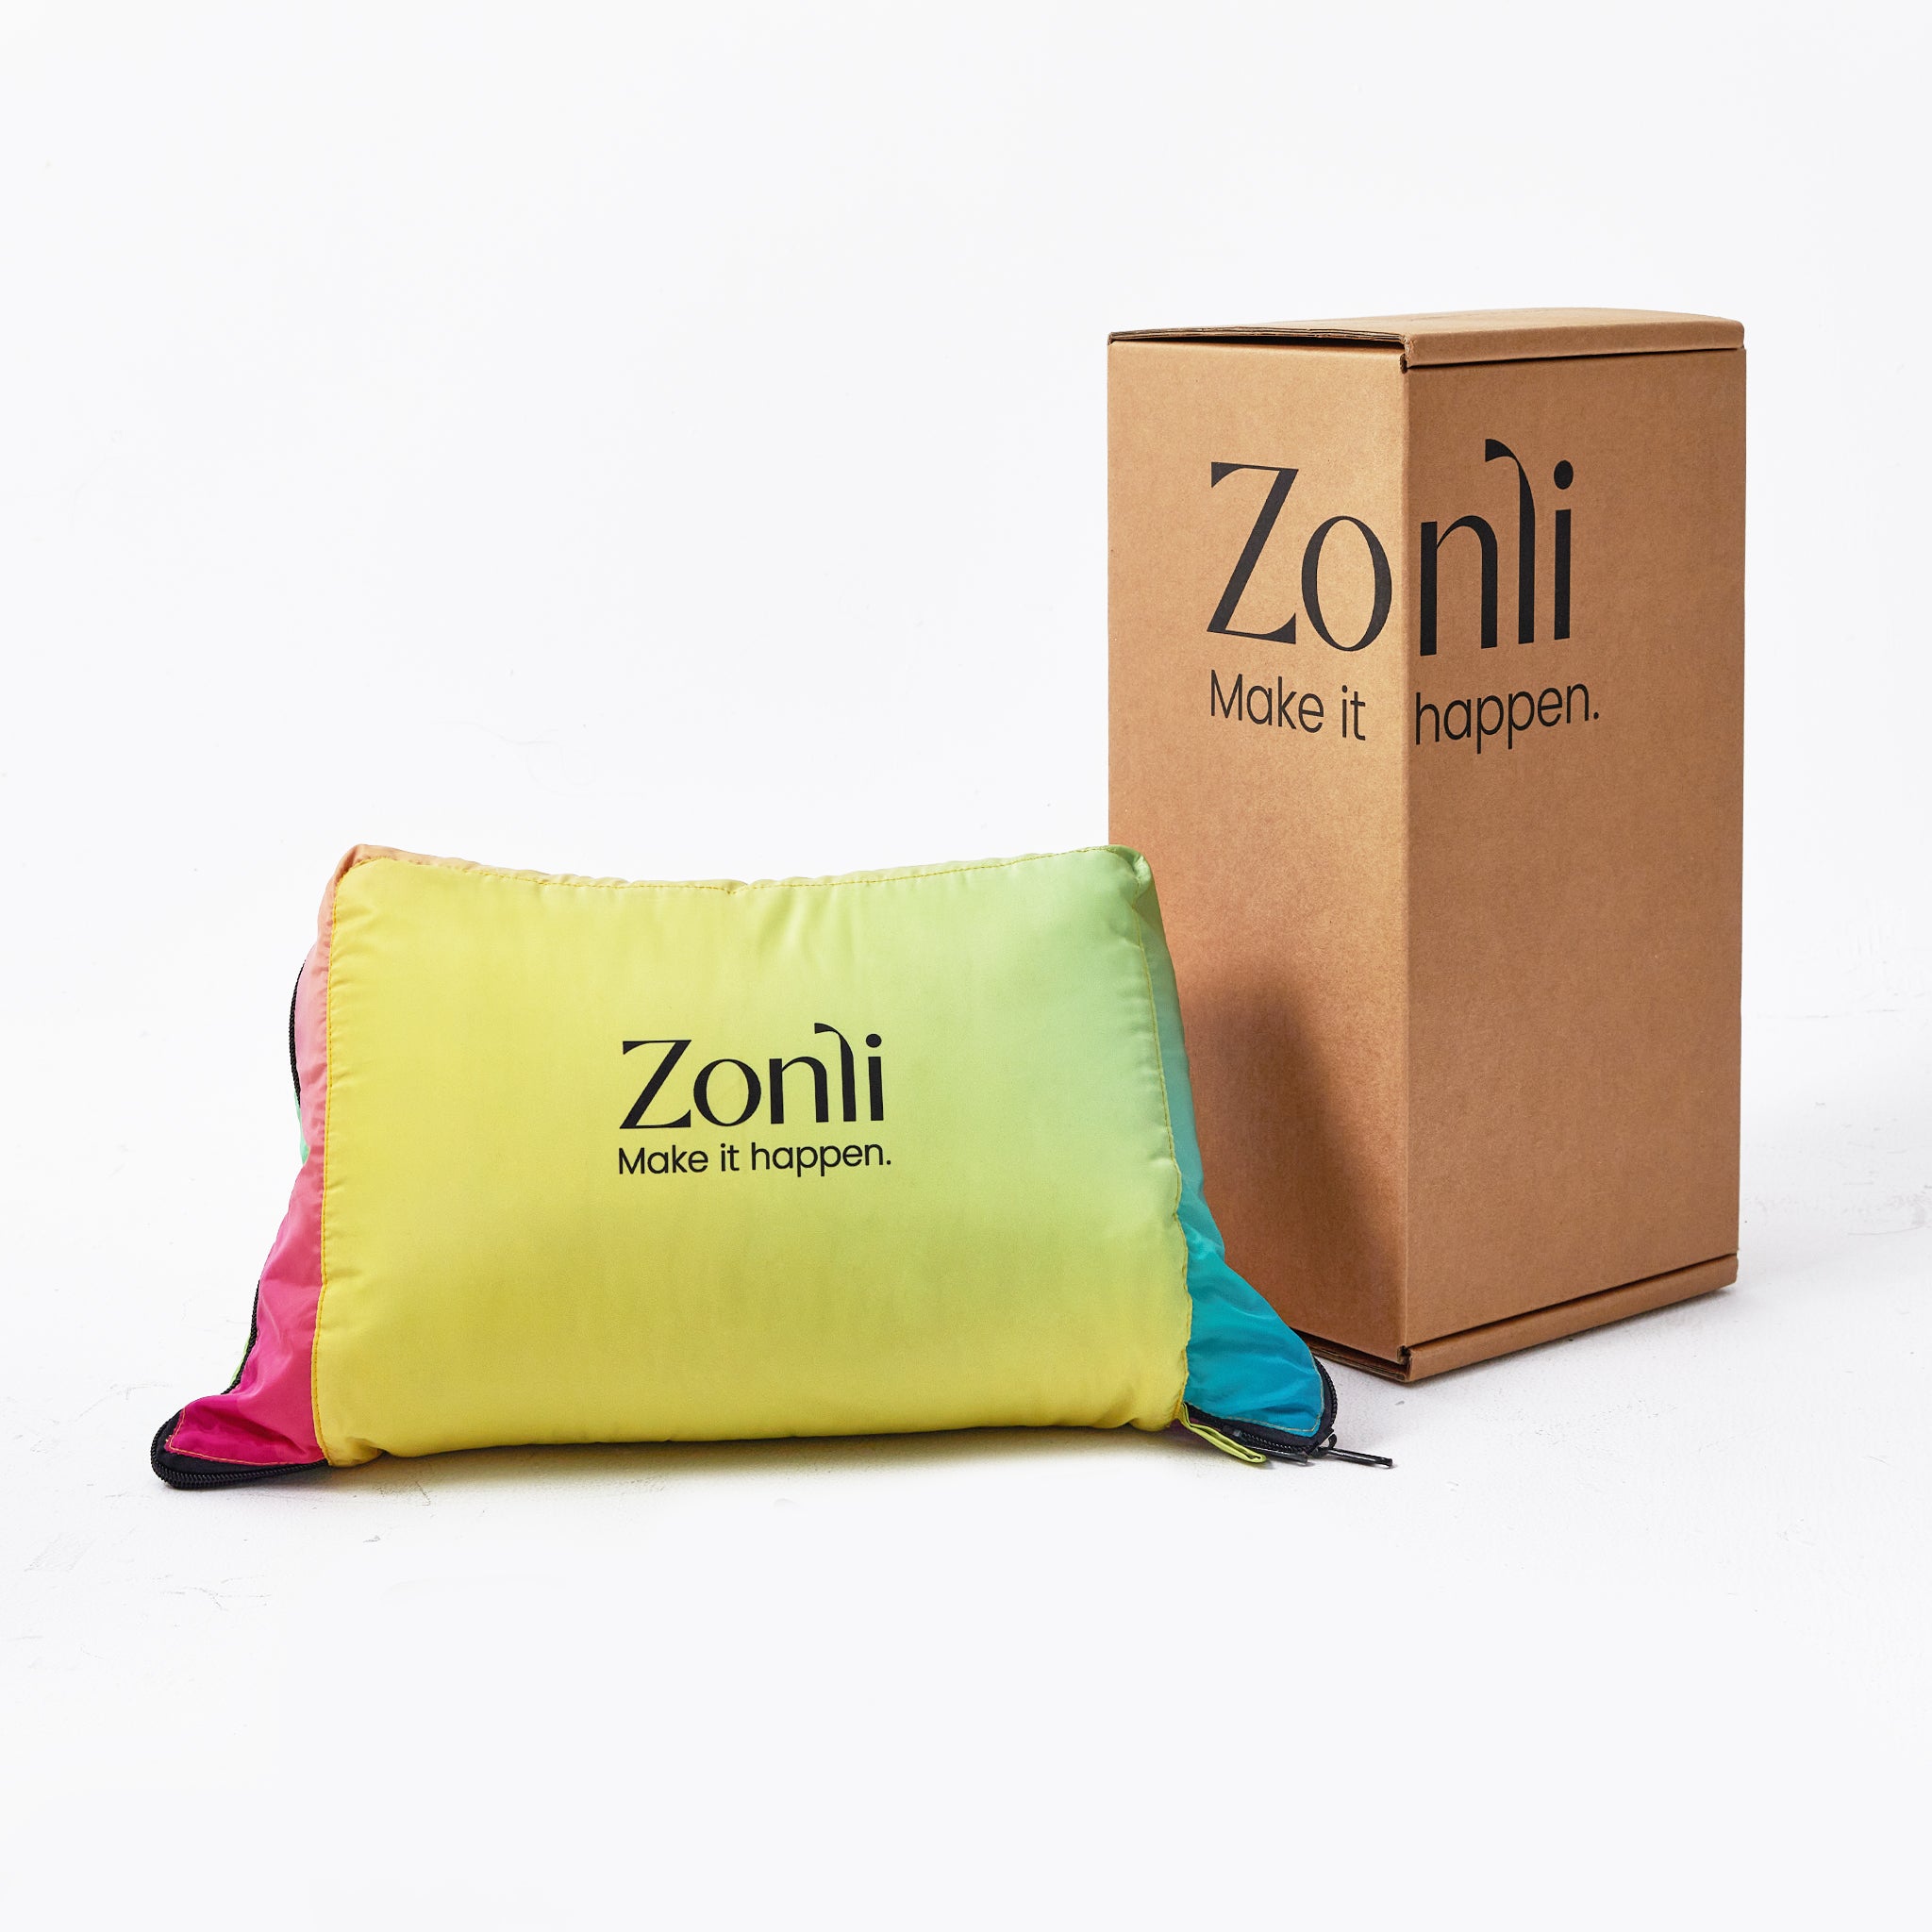 Zonli Portable Battery Heated Blanket for camping and travel